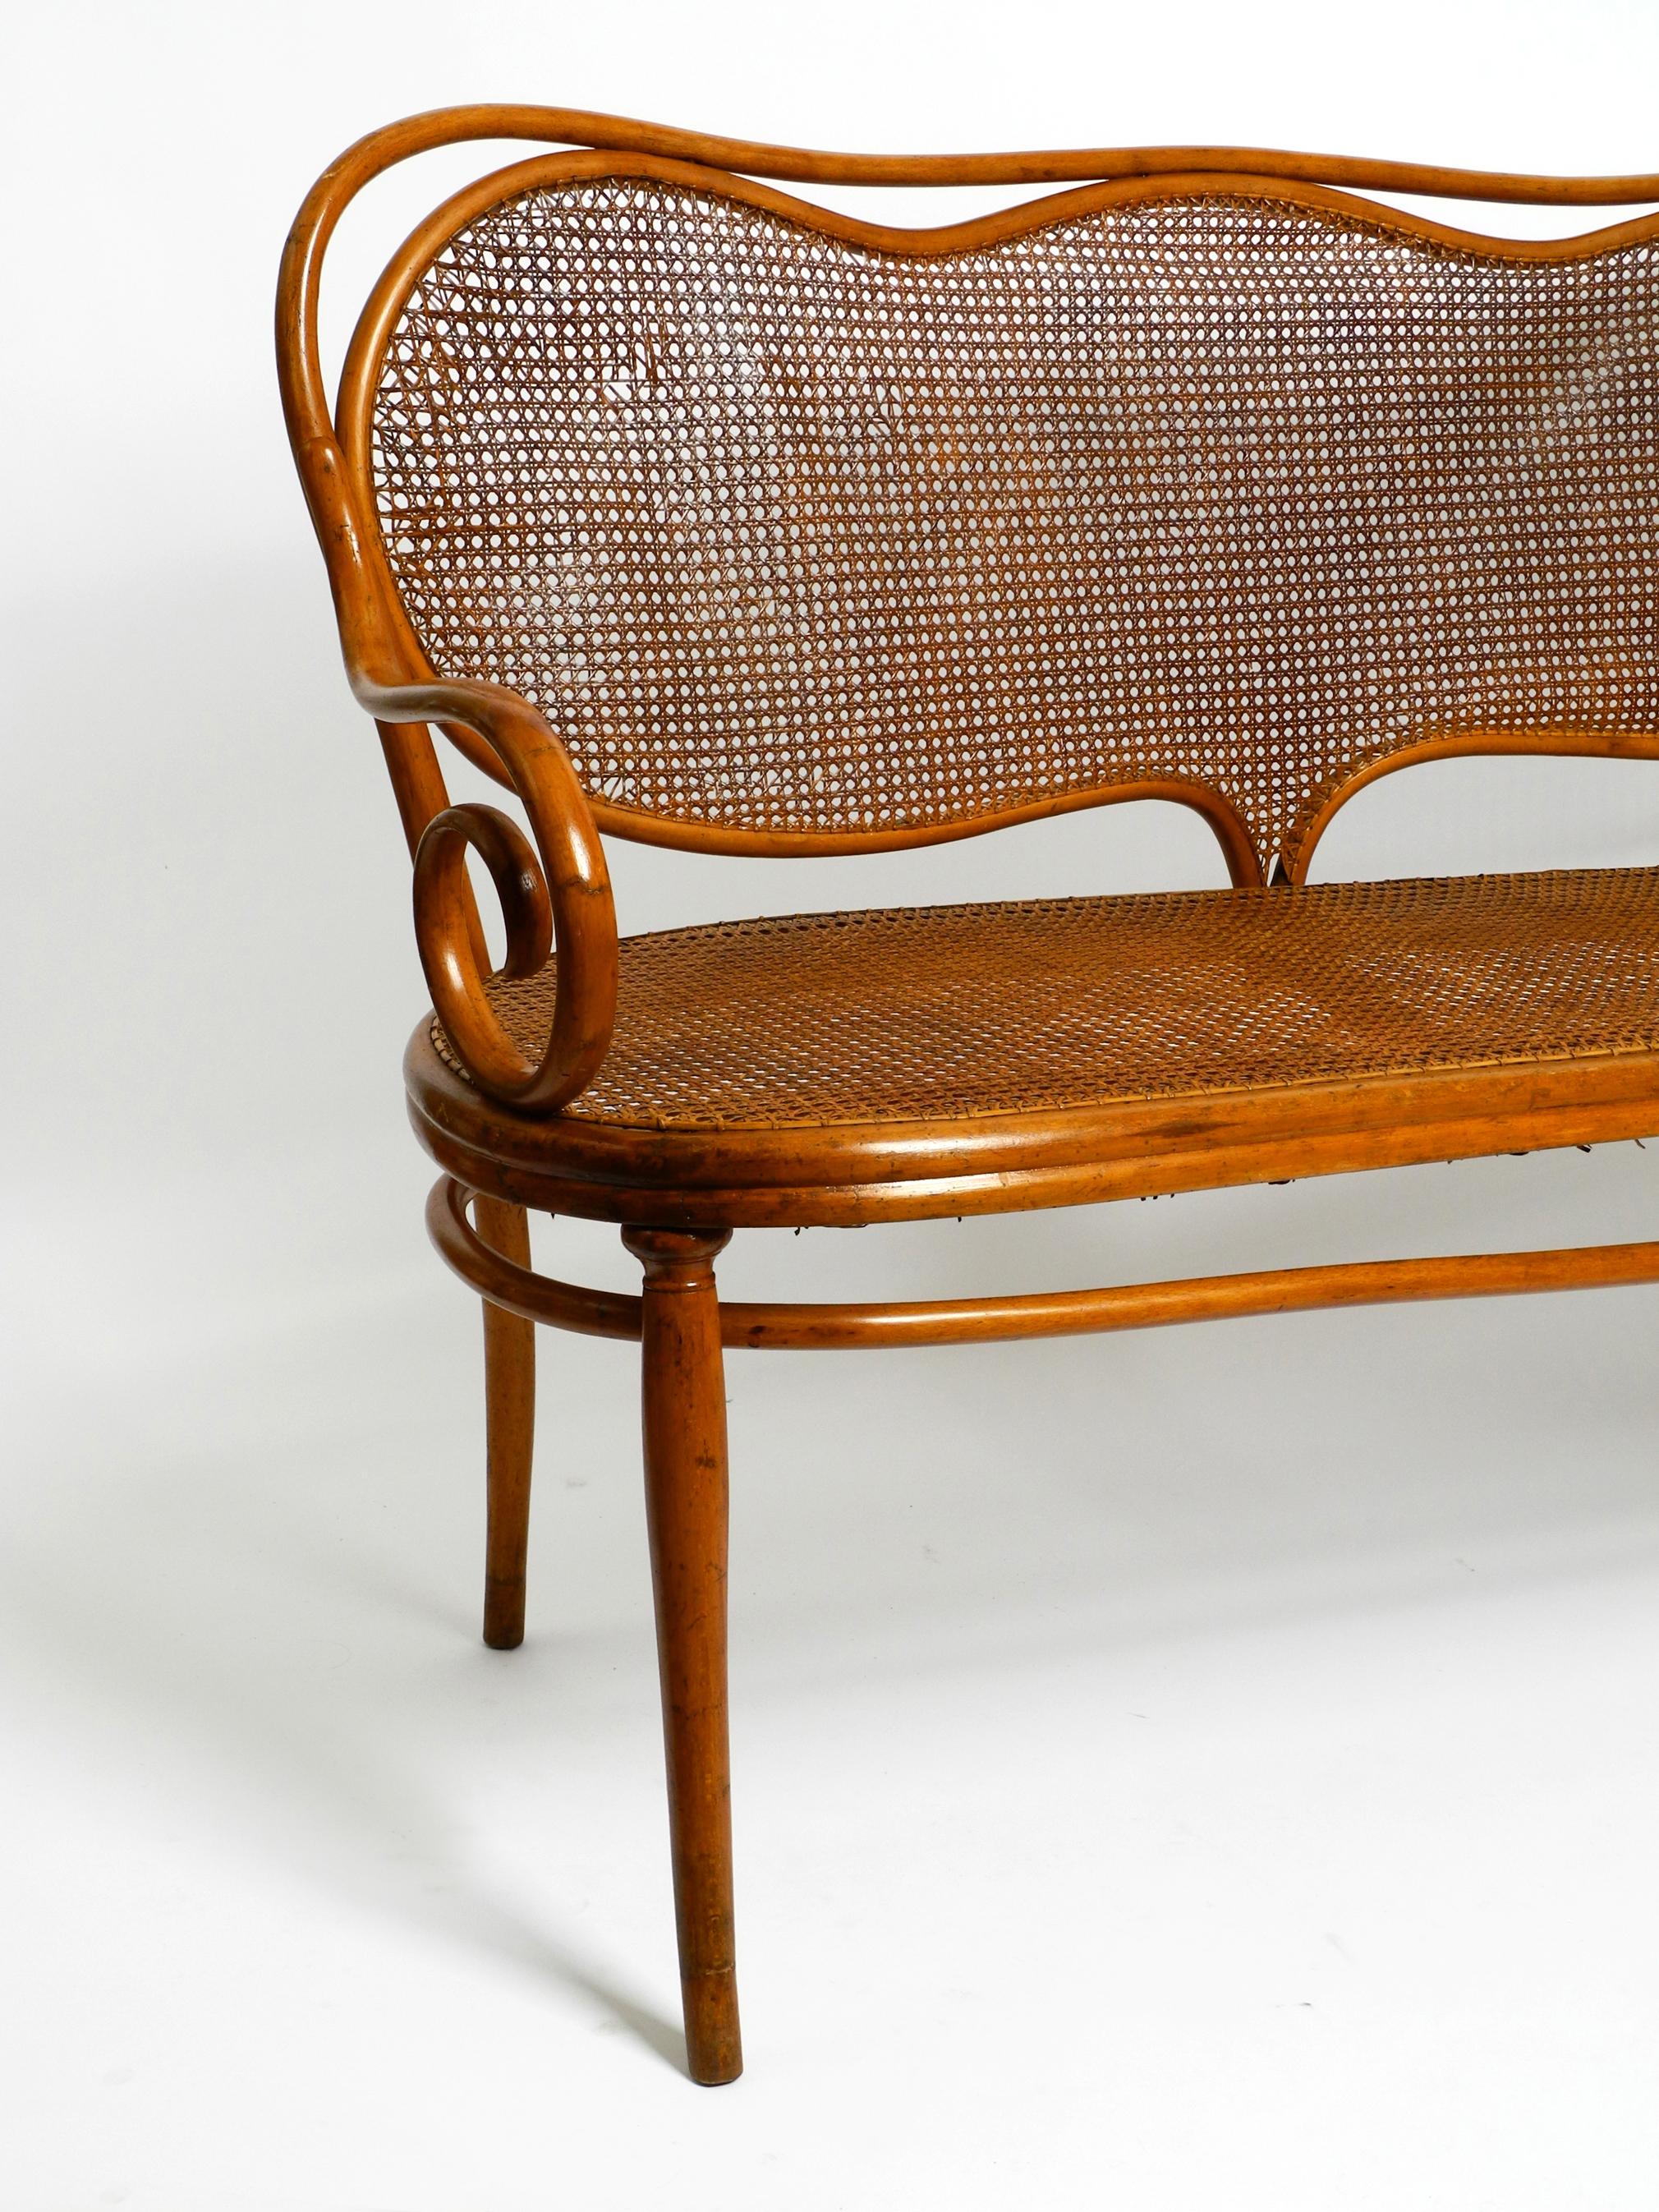 Bench No. 5 Thonet 1858 made of bent beech and wickerwork | restoration needed For Sale 13